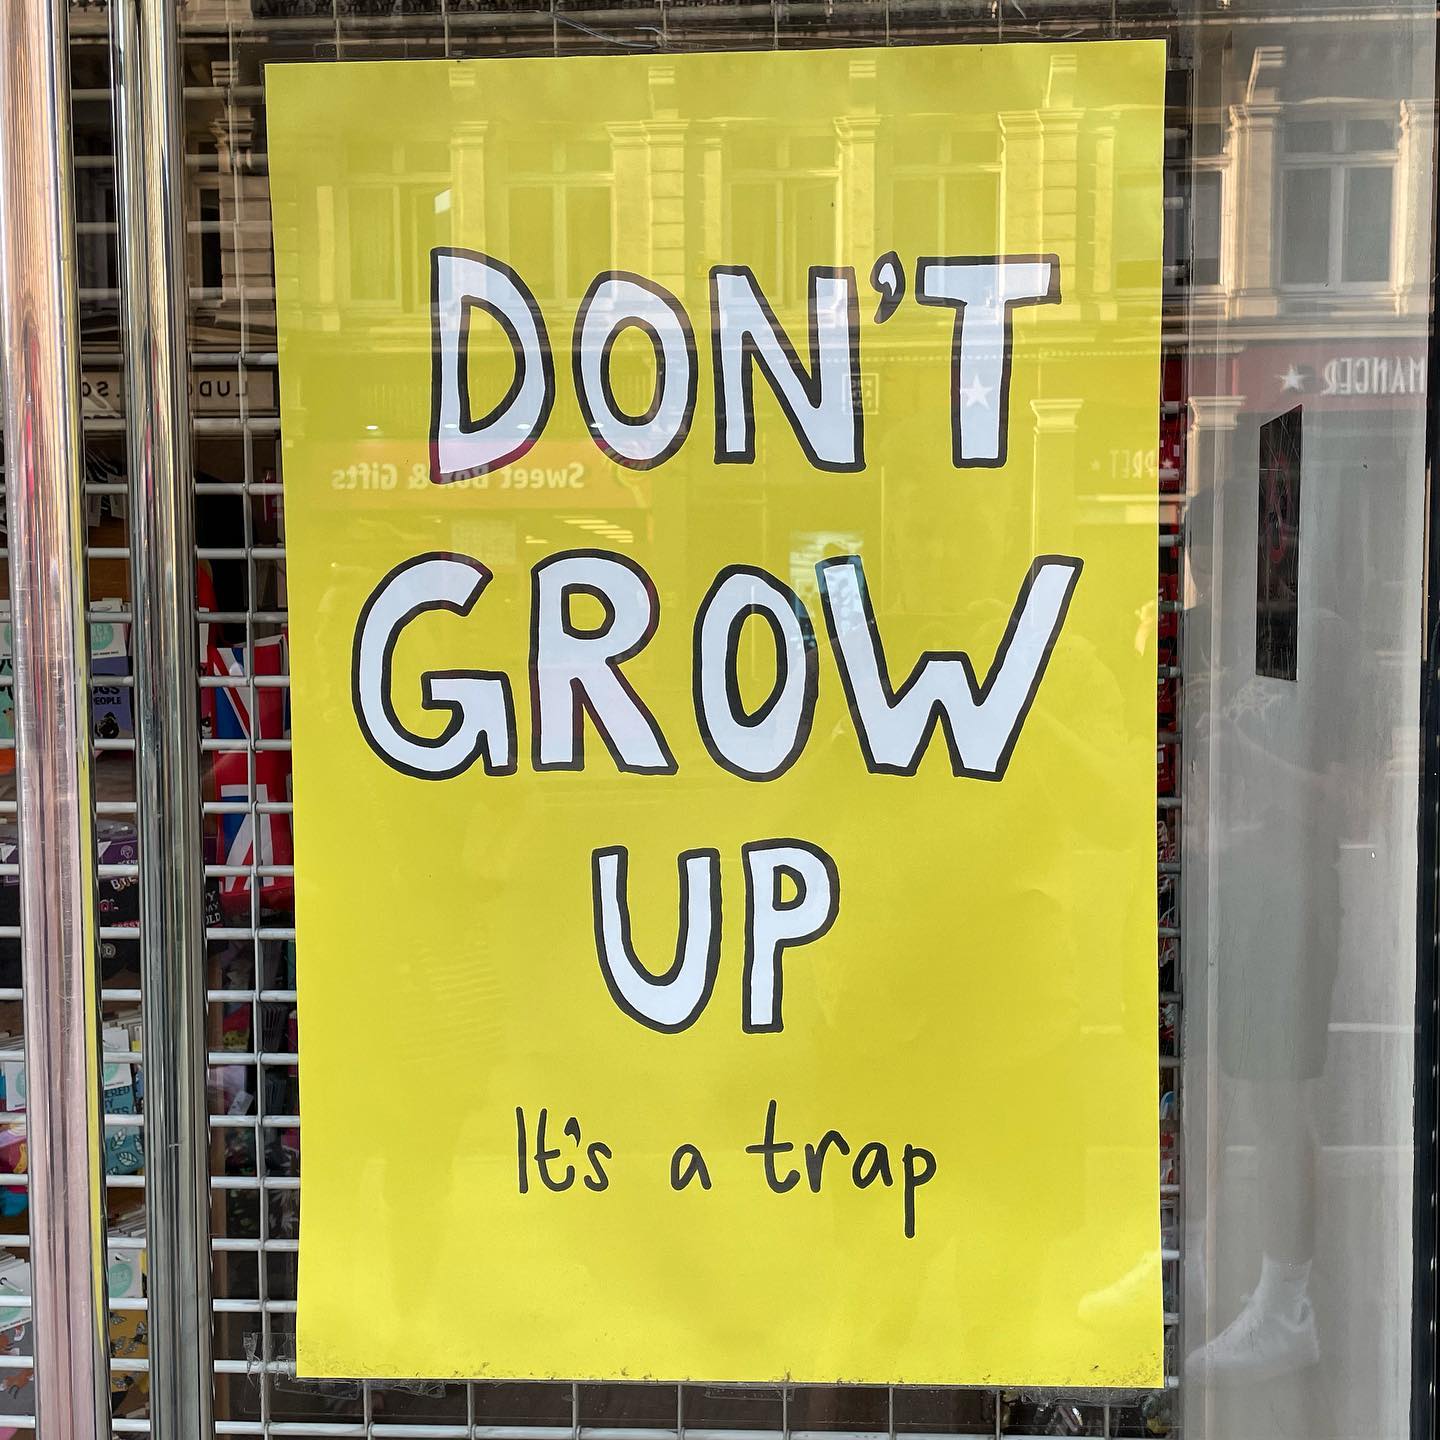 Sage advice from a toy shop.